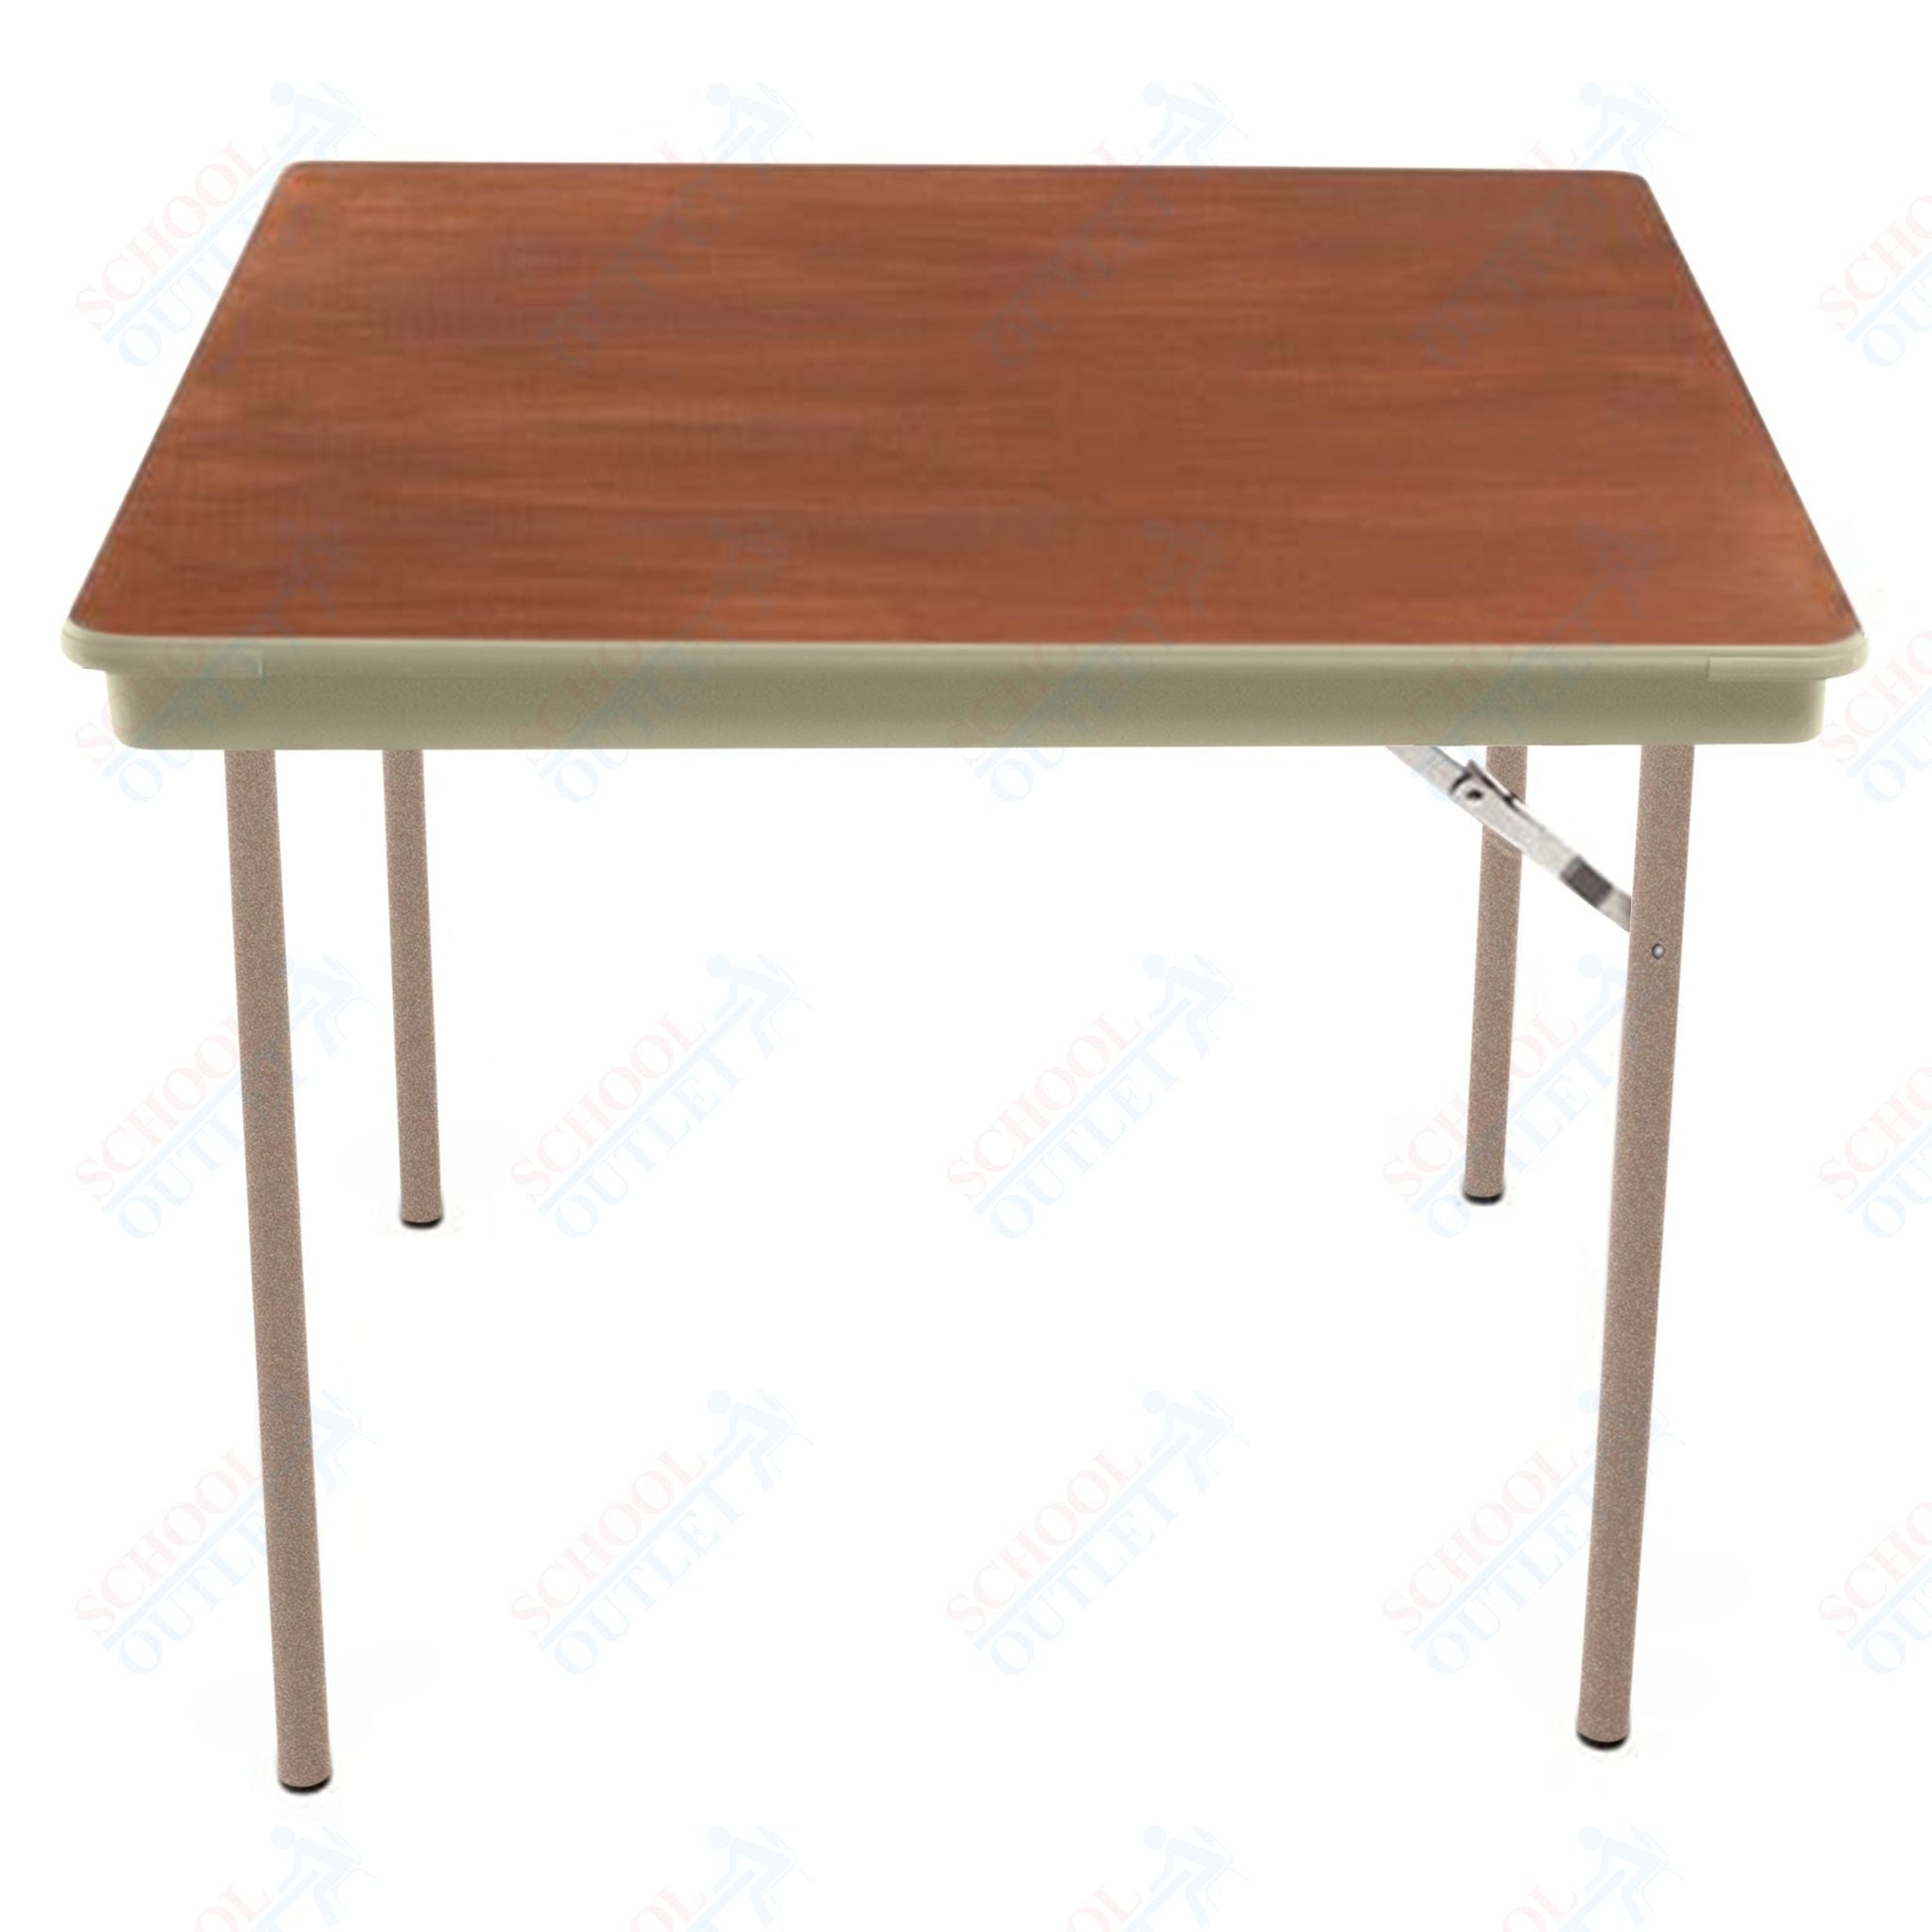 AmTab Folding Table - Plywood Stained and Sealed - Vinyl T - Molding Edge - Square - 36"W x 36"L x 29"H (AmTab AMT - SQ36PM) - SchoolOutlet